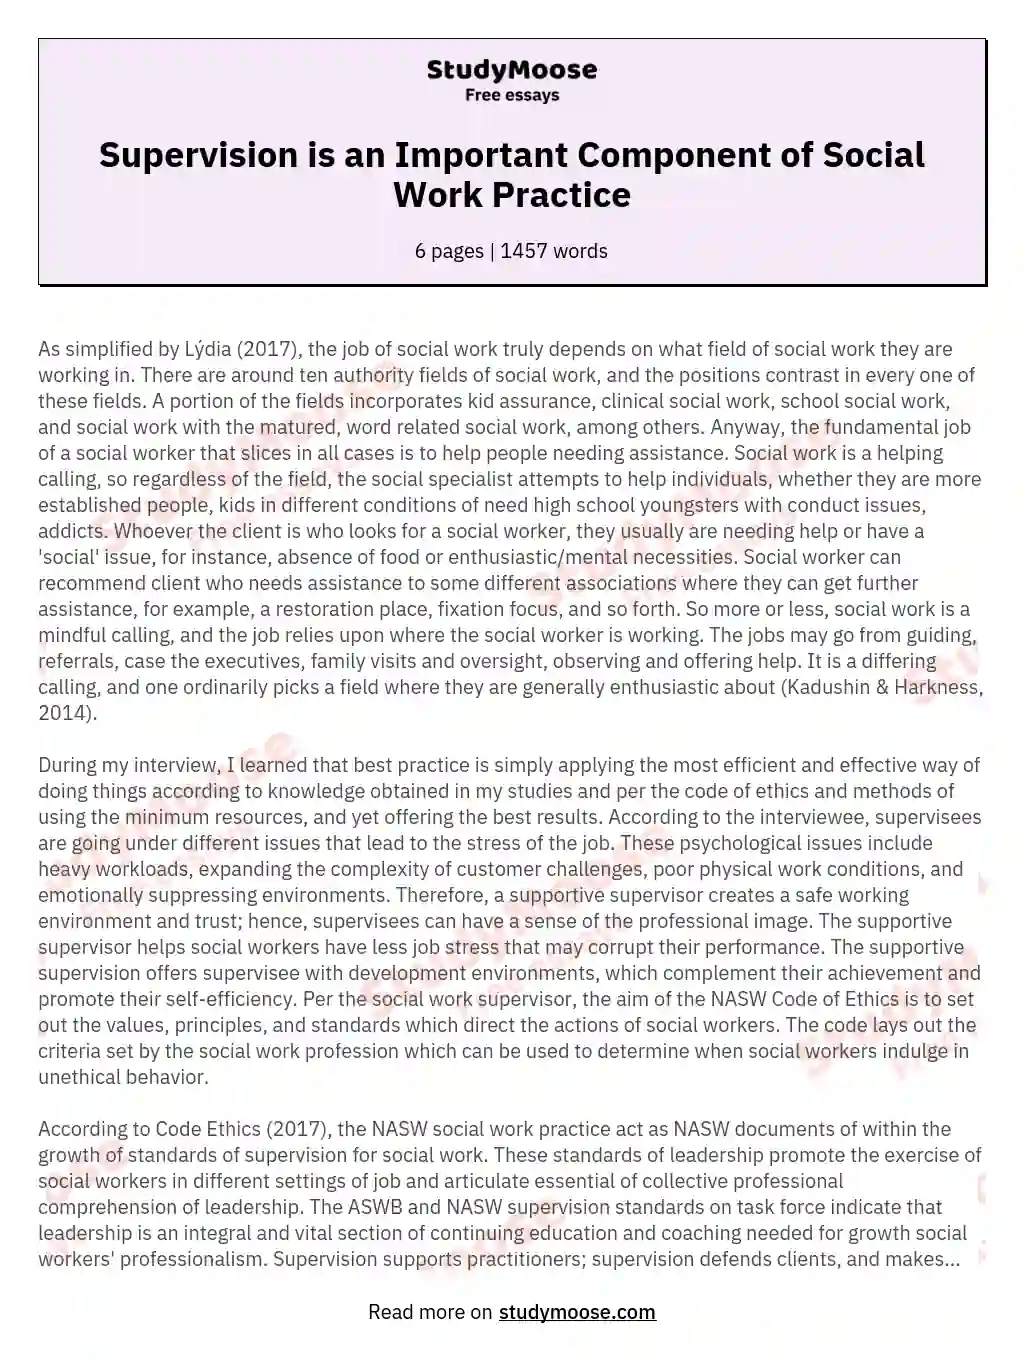 Supervision is an Important Component of Social Work Practice essay